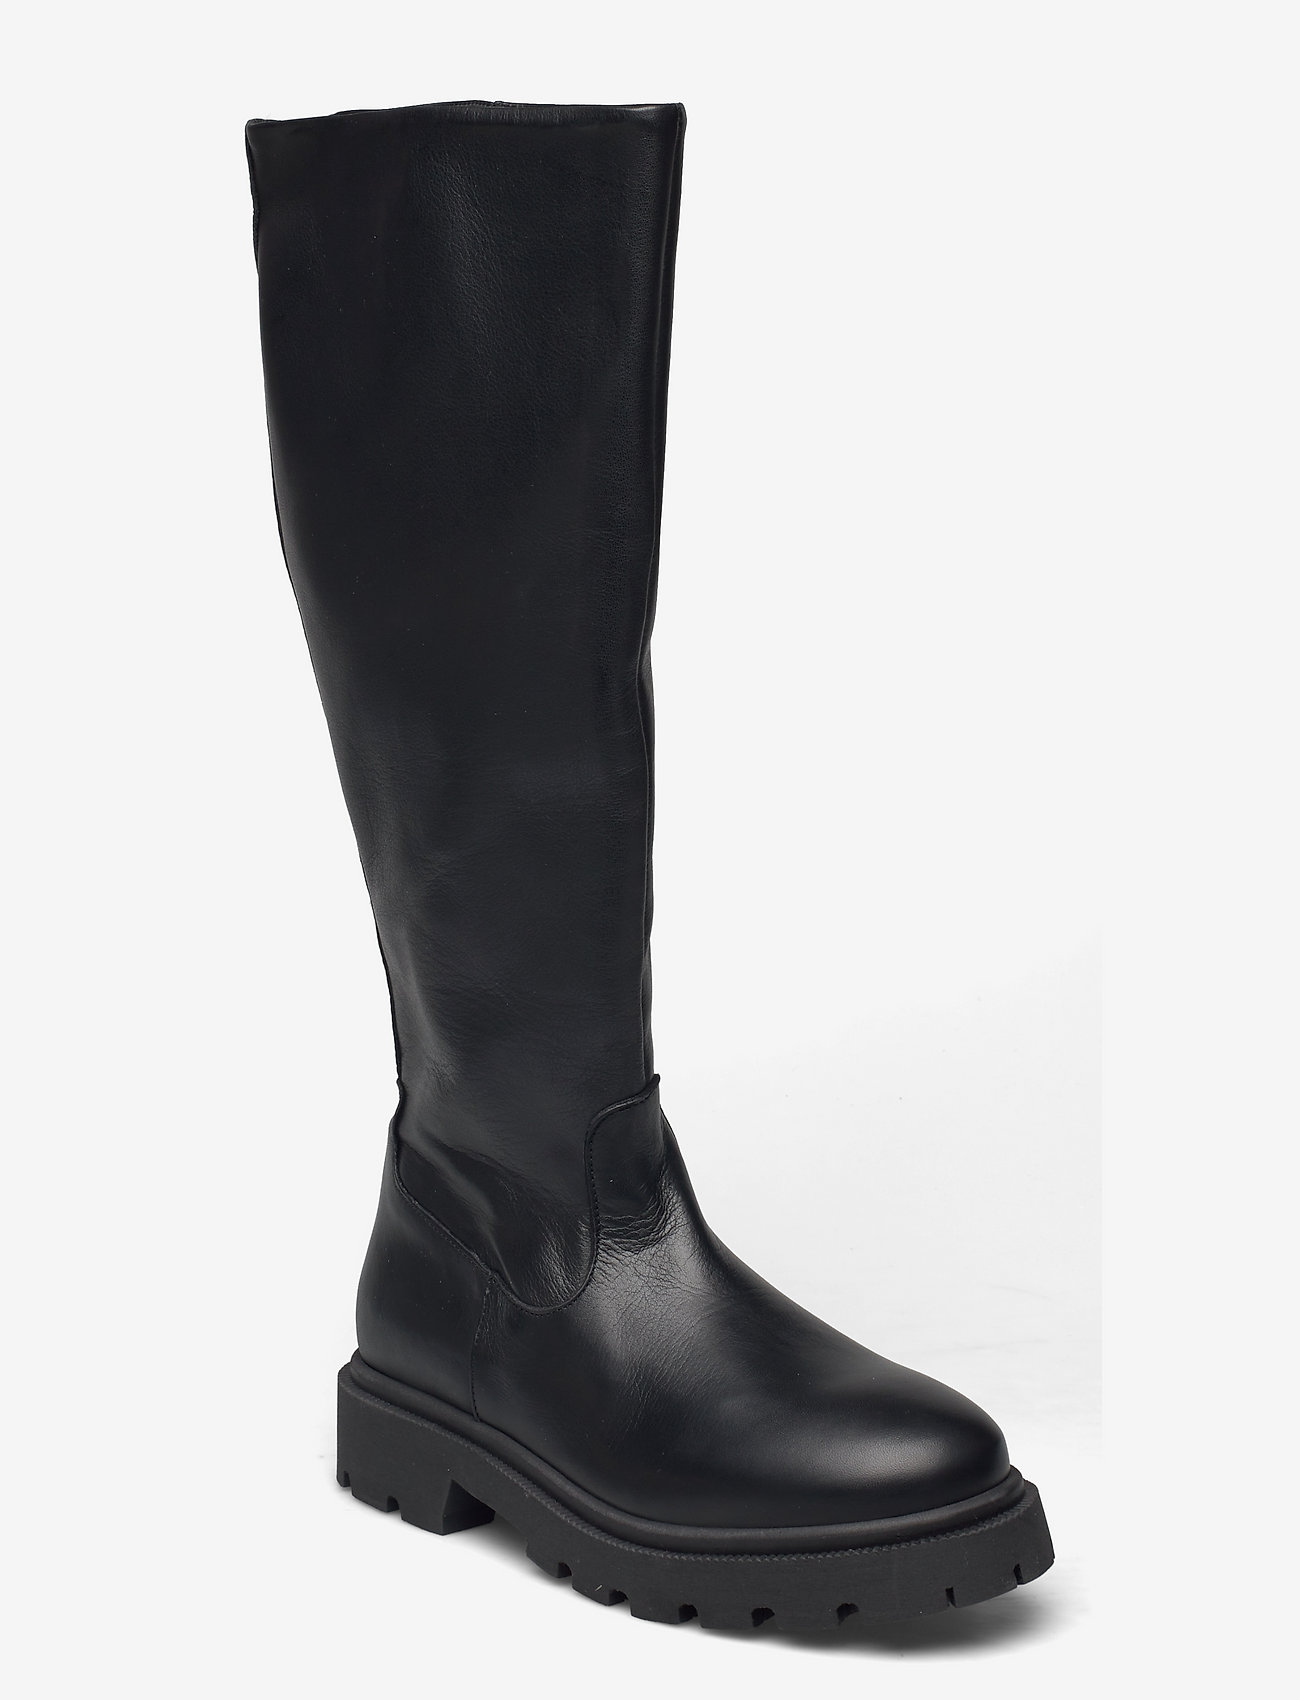 Selected Femme - SLFEMMA HIGH SHAFTED LEATHER BOOT B - lange laarzen - black - 0